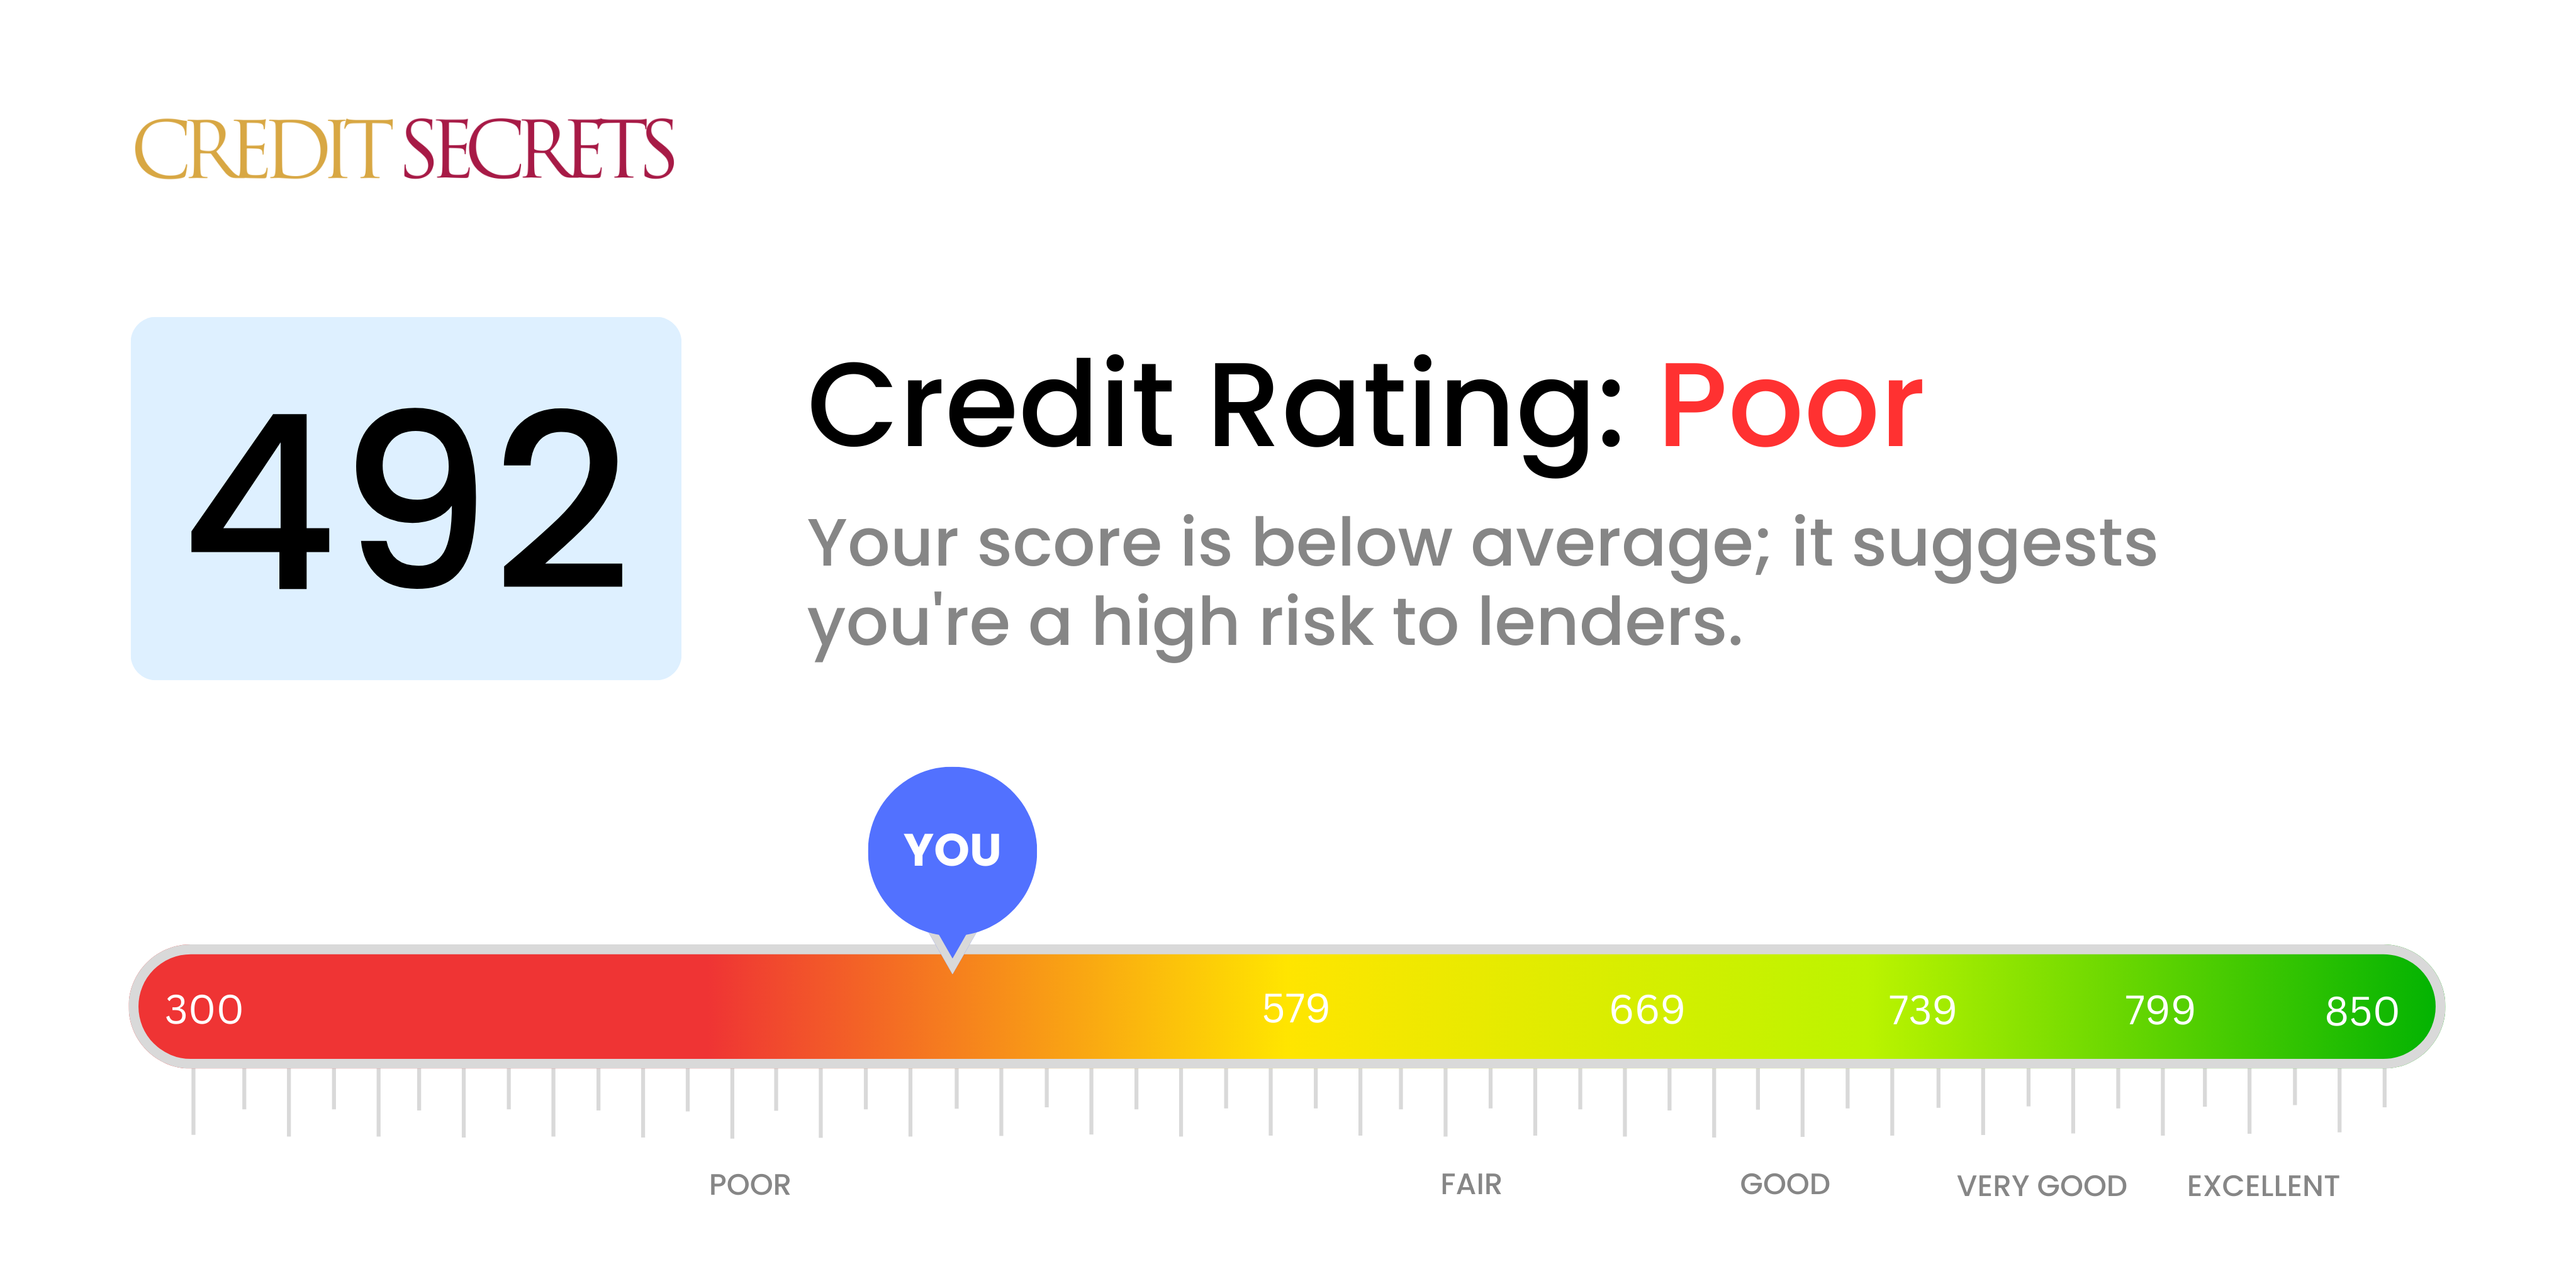 Is 492 a good credit score?